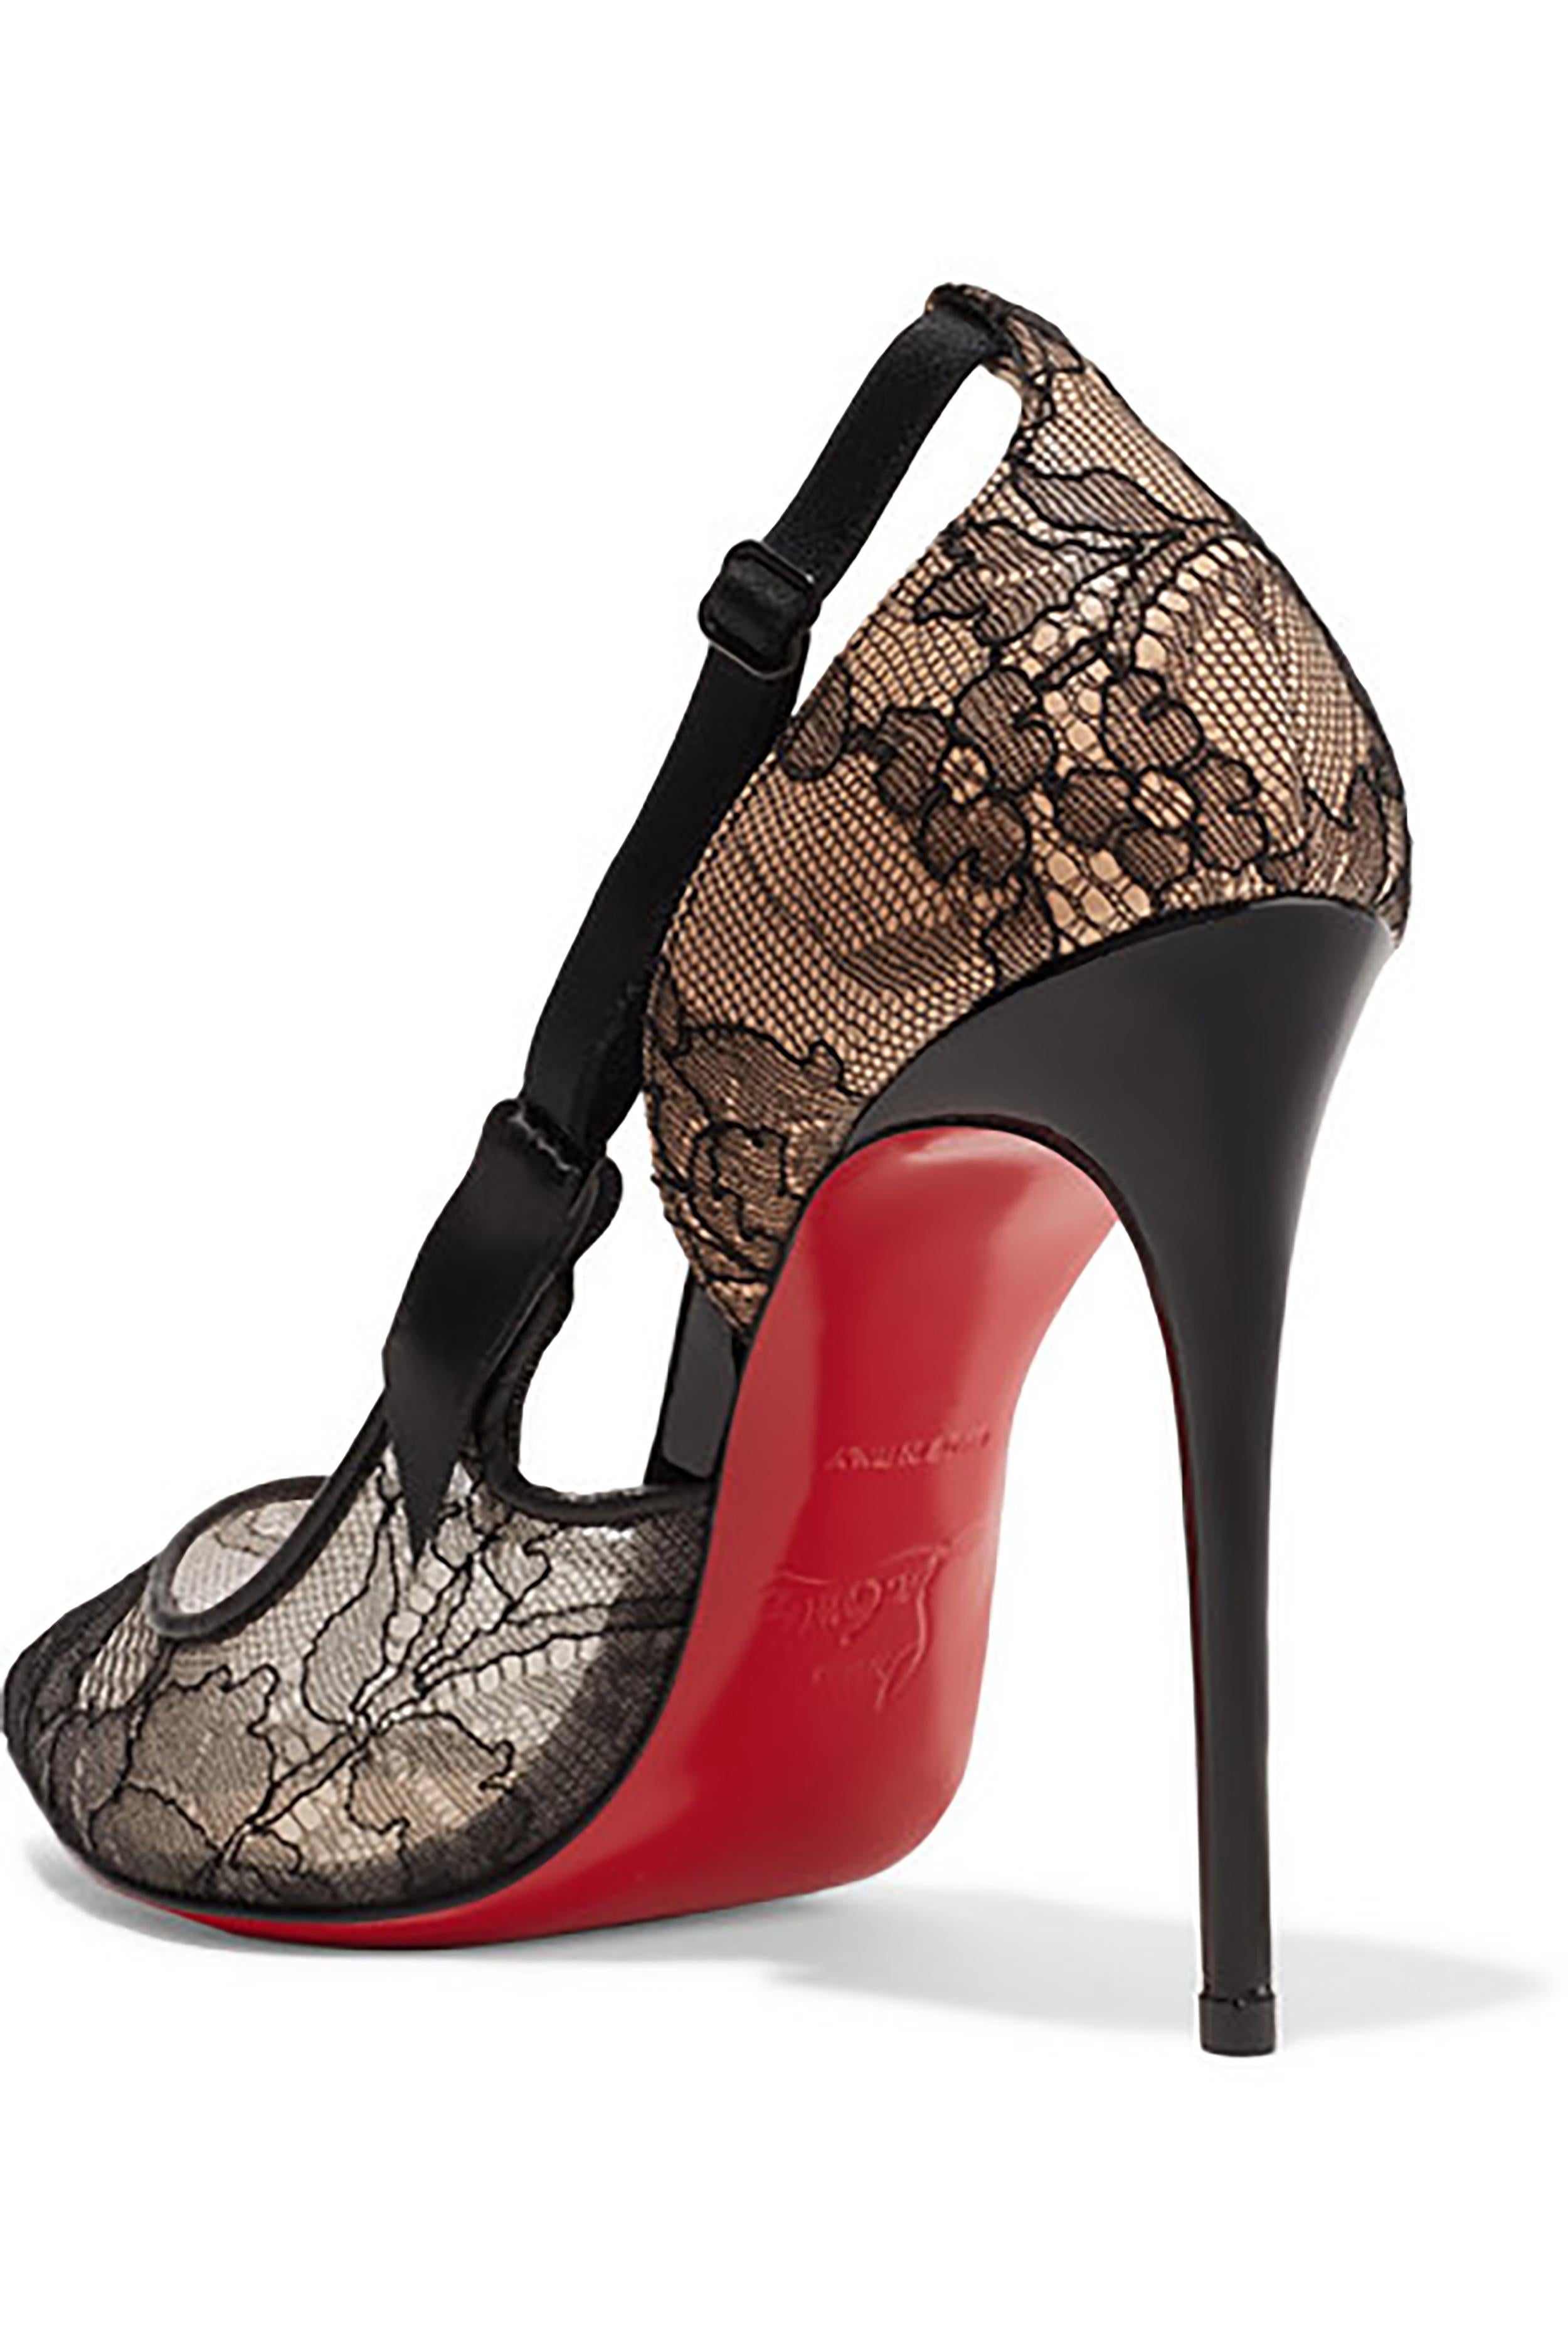 Christian Louboutin Hot Jeanbi 100 satin and patent leather-trimmed lace pumps

-Lingerie inspired
-Suspender Strap detail
- Pointed toe
- Lace vamp with nude satin back covered in lace
- Heel measures approximately 100mm/ 4 inches
- Black lace,